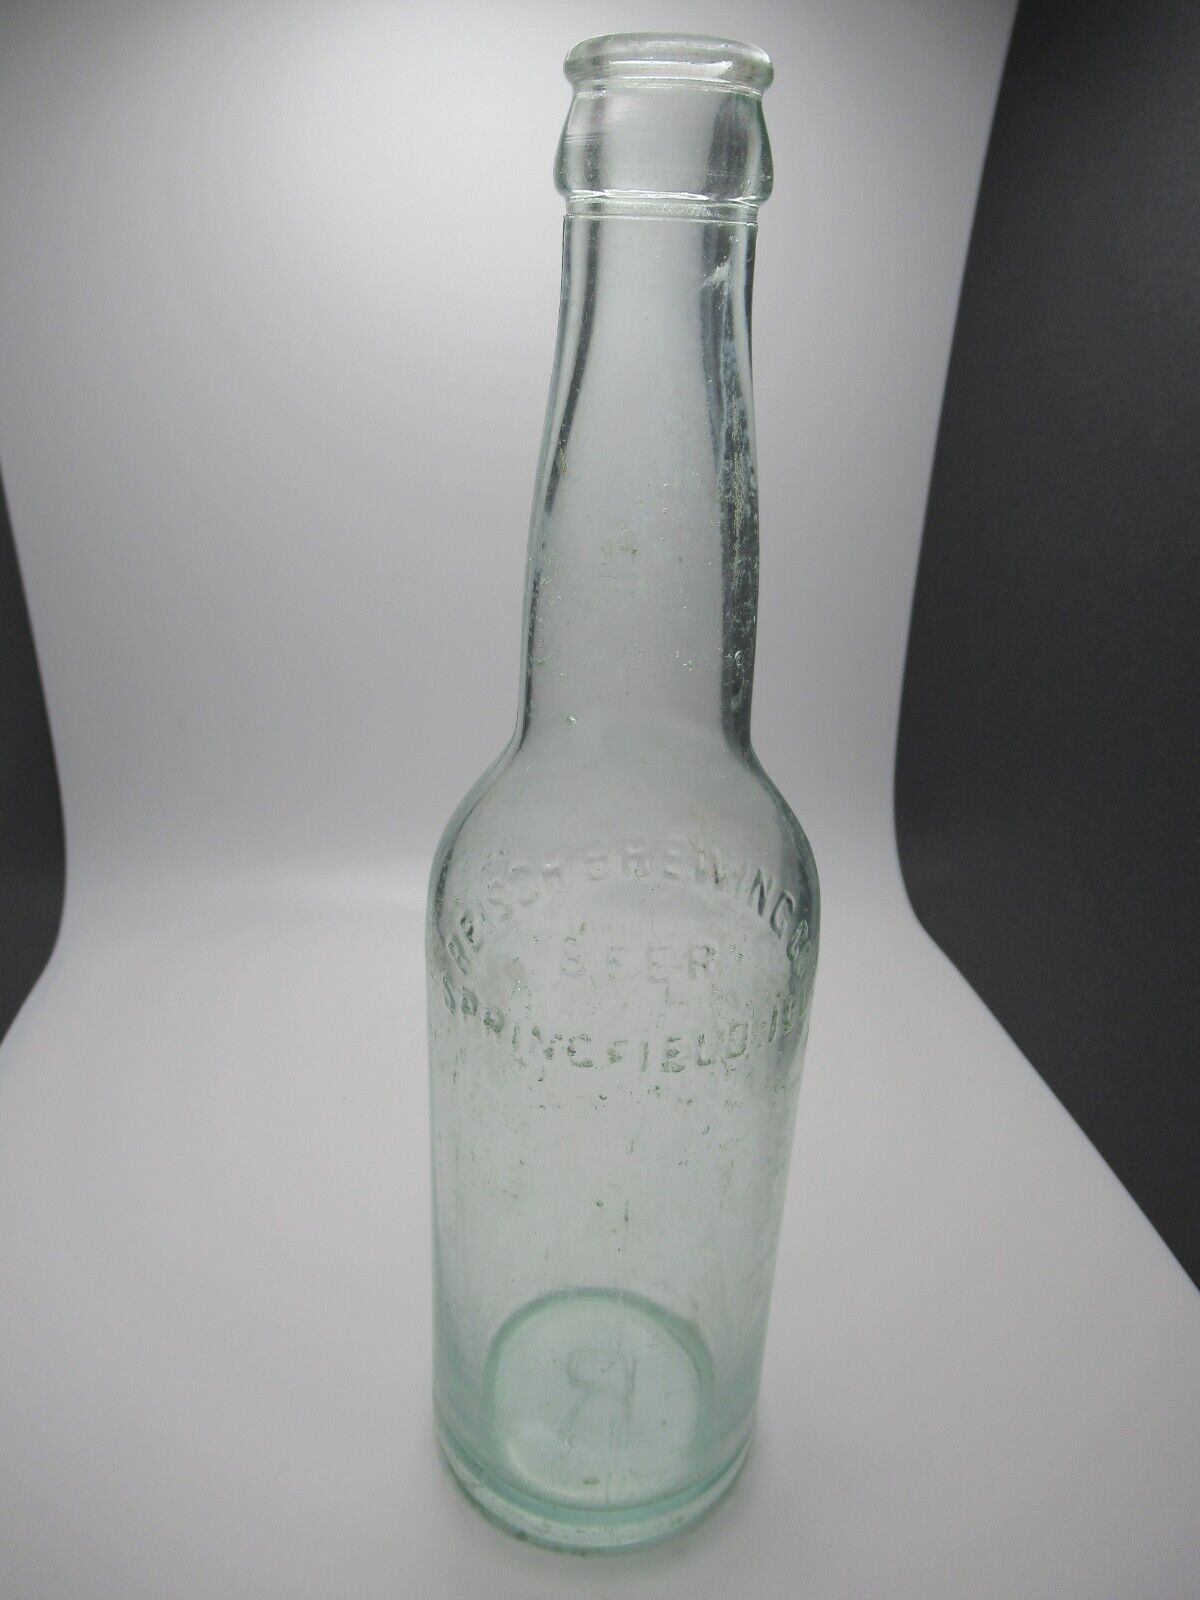 Reisch Brewing Co. Springfield Ill. Clear Glass Embossed Bottle